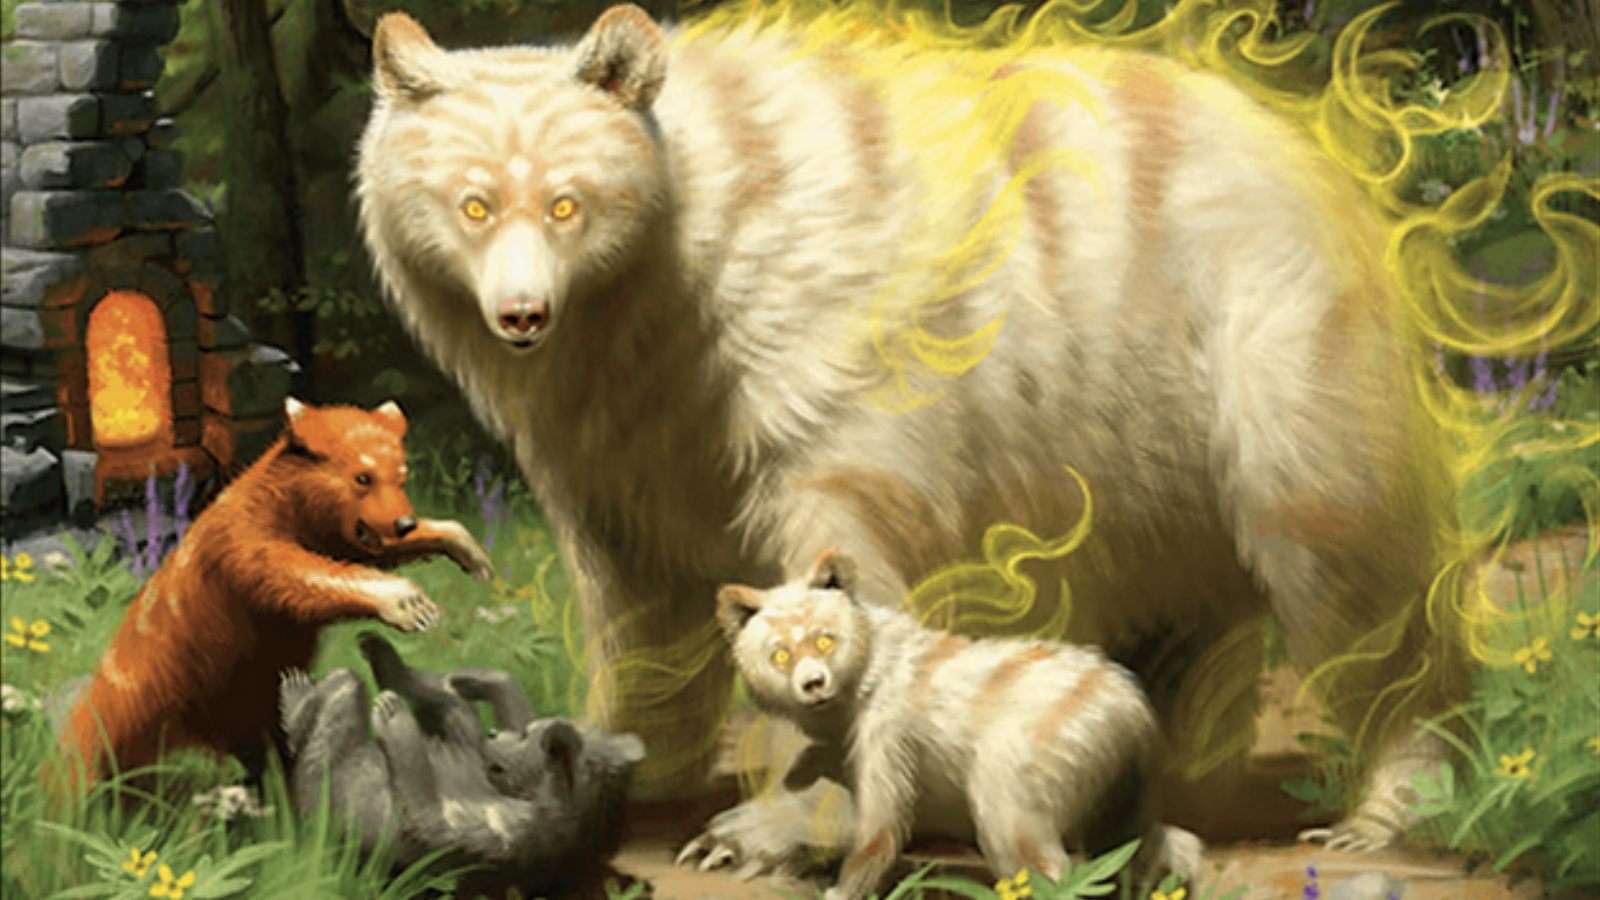 MTG mother bear and cubs